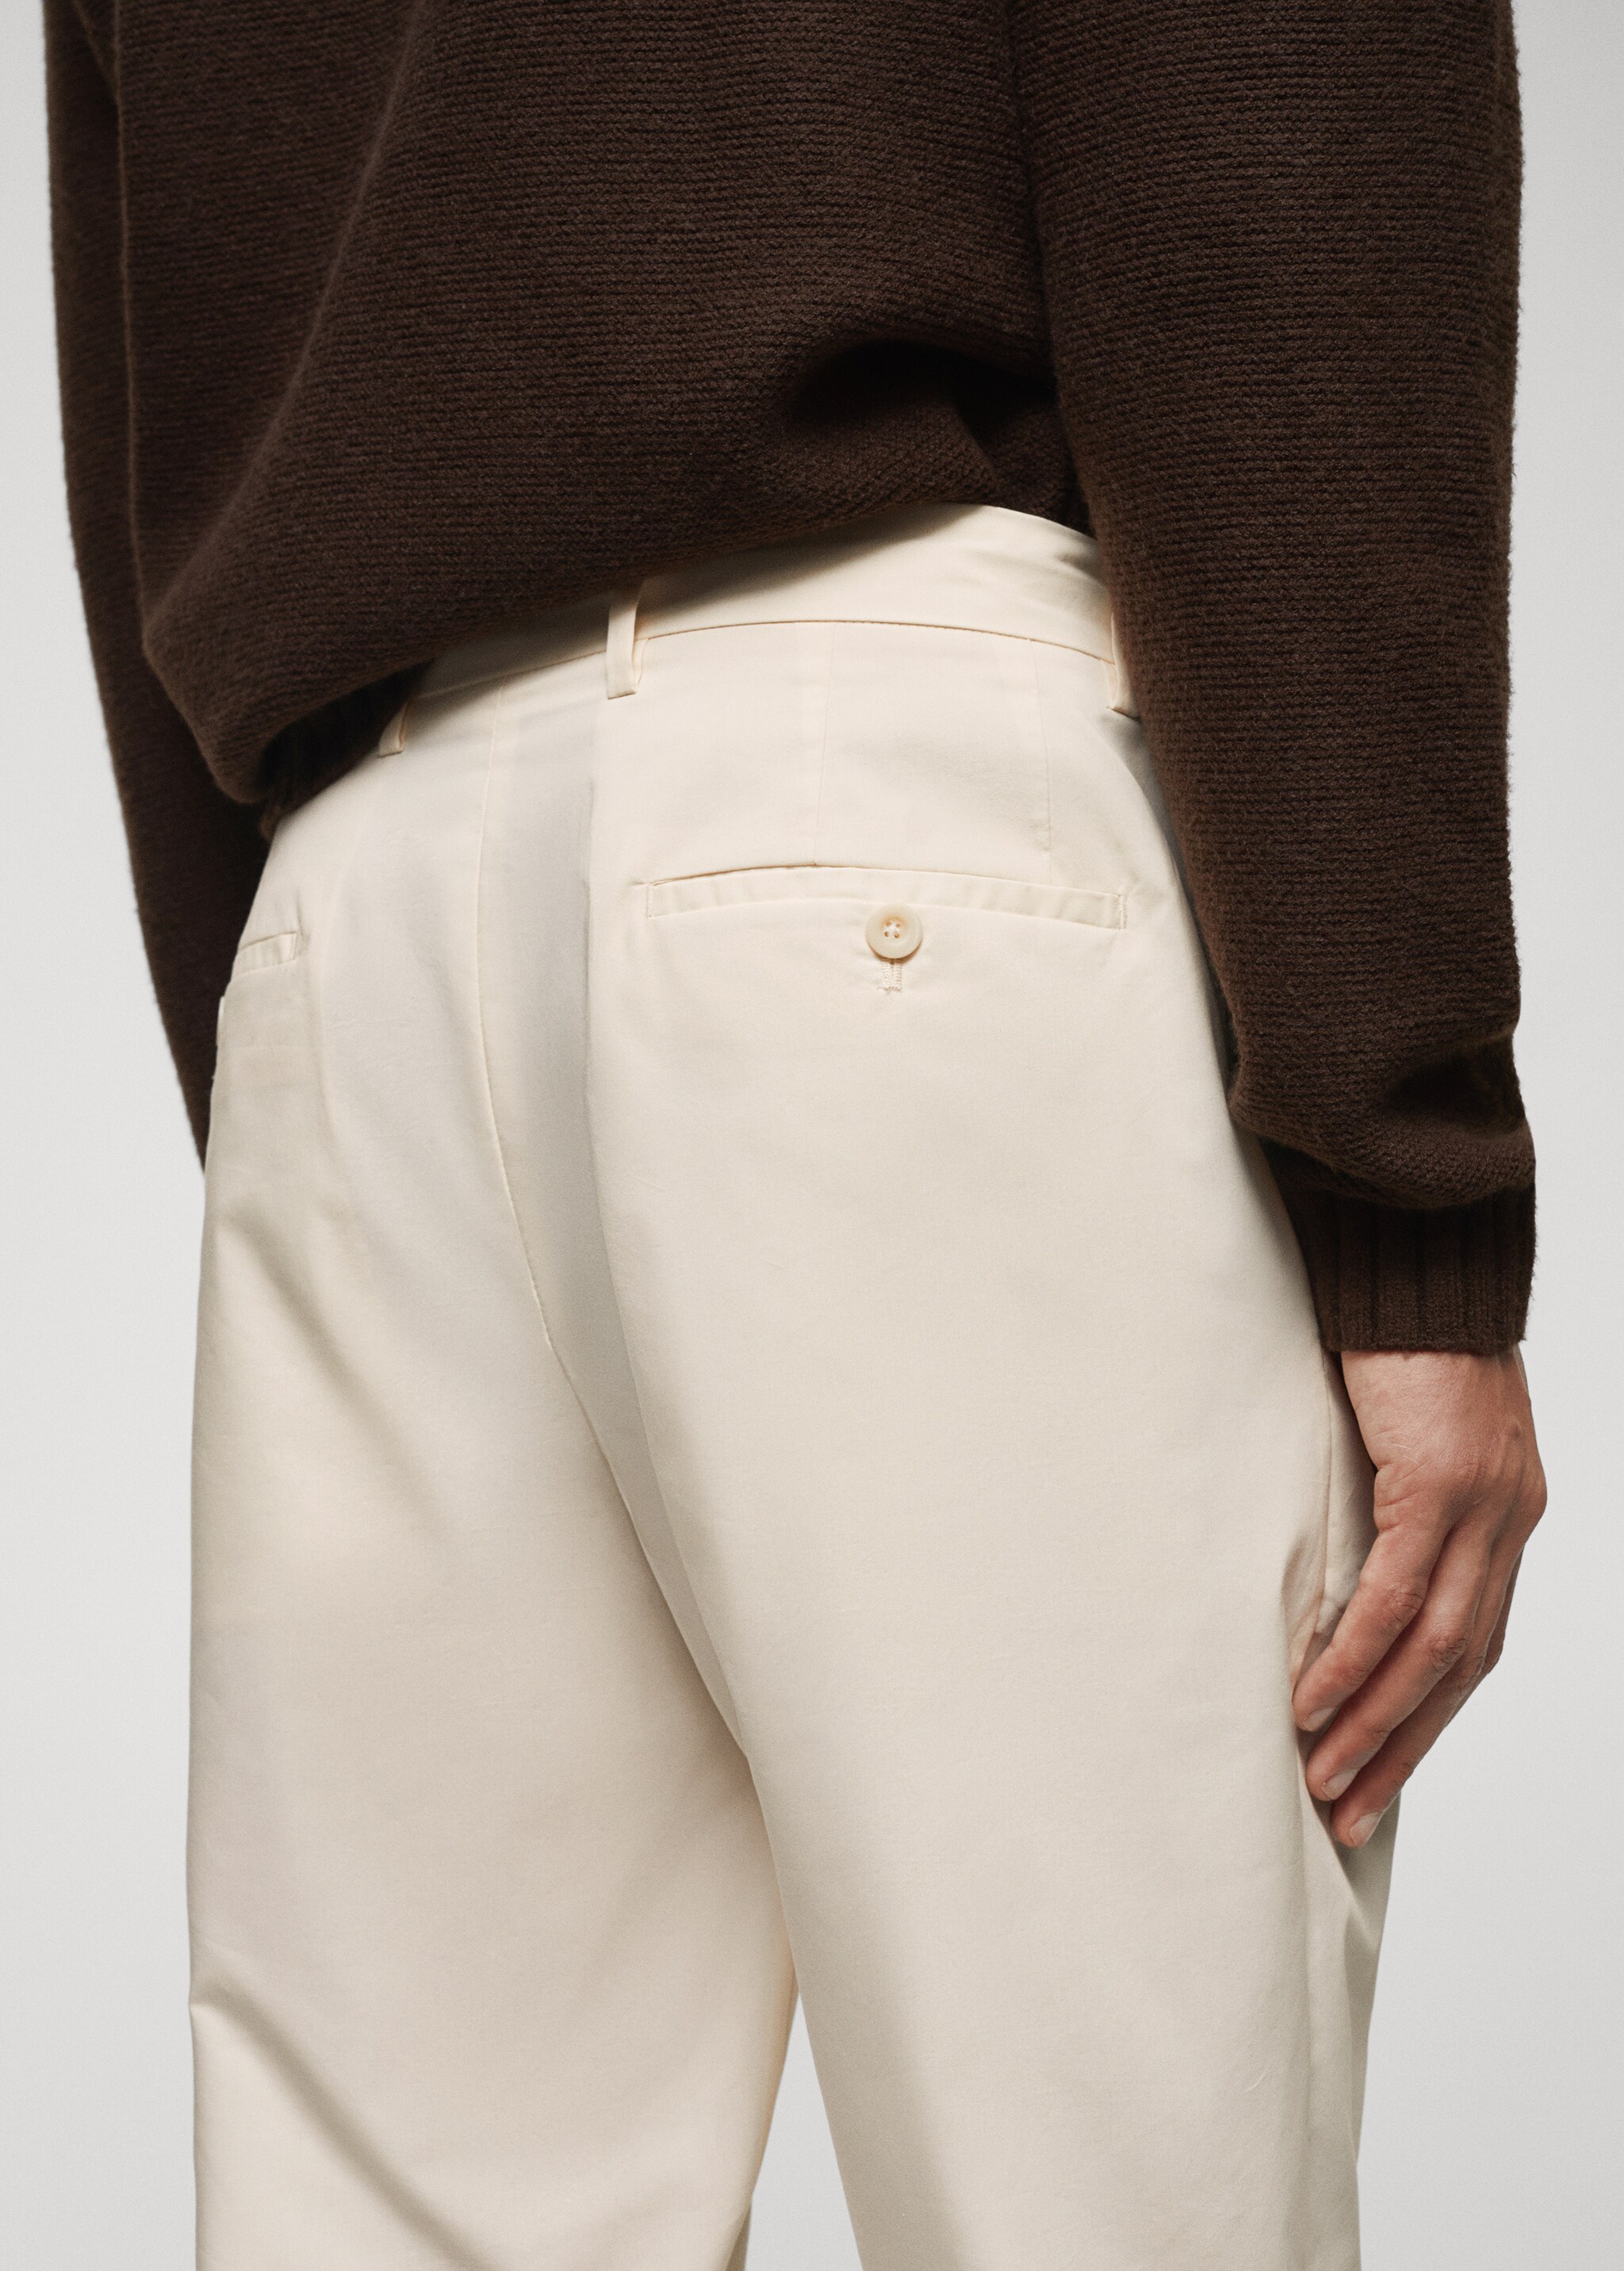 Cotton chinos - Details of the article 4